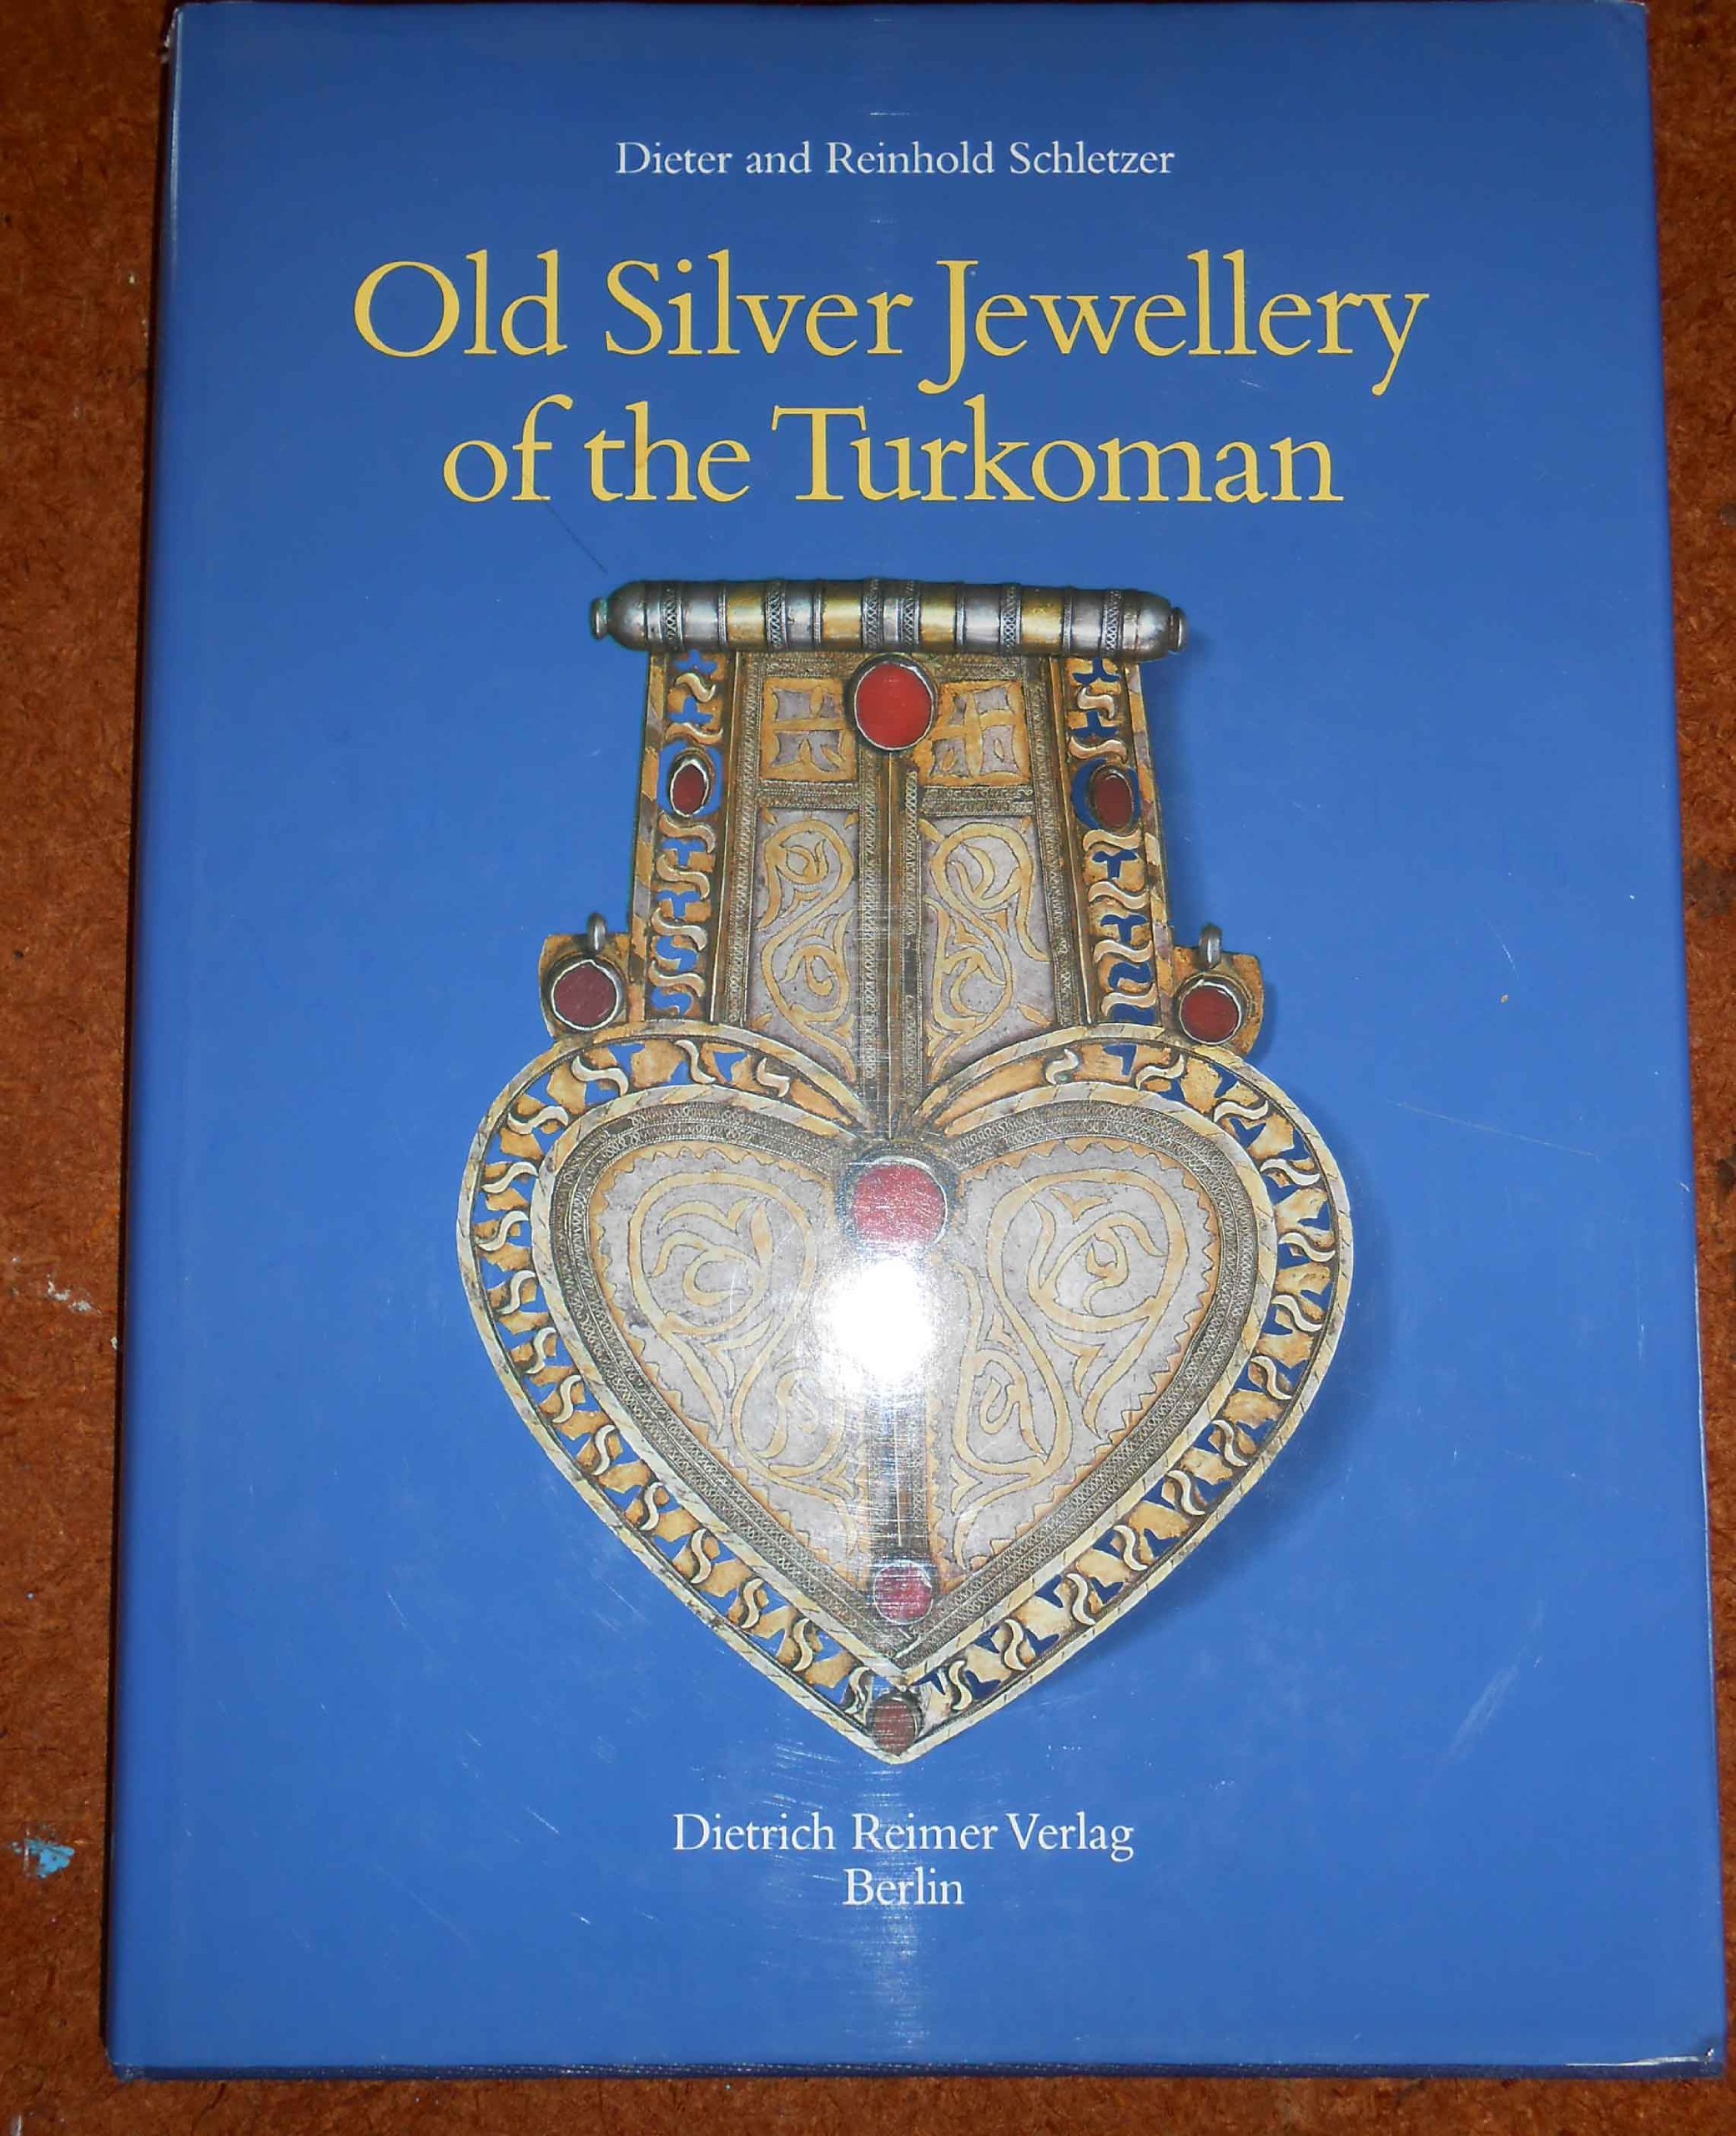 Old silver jewellery of the Turkoman